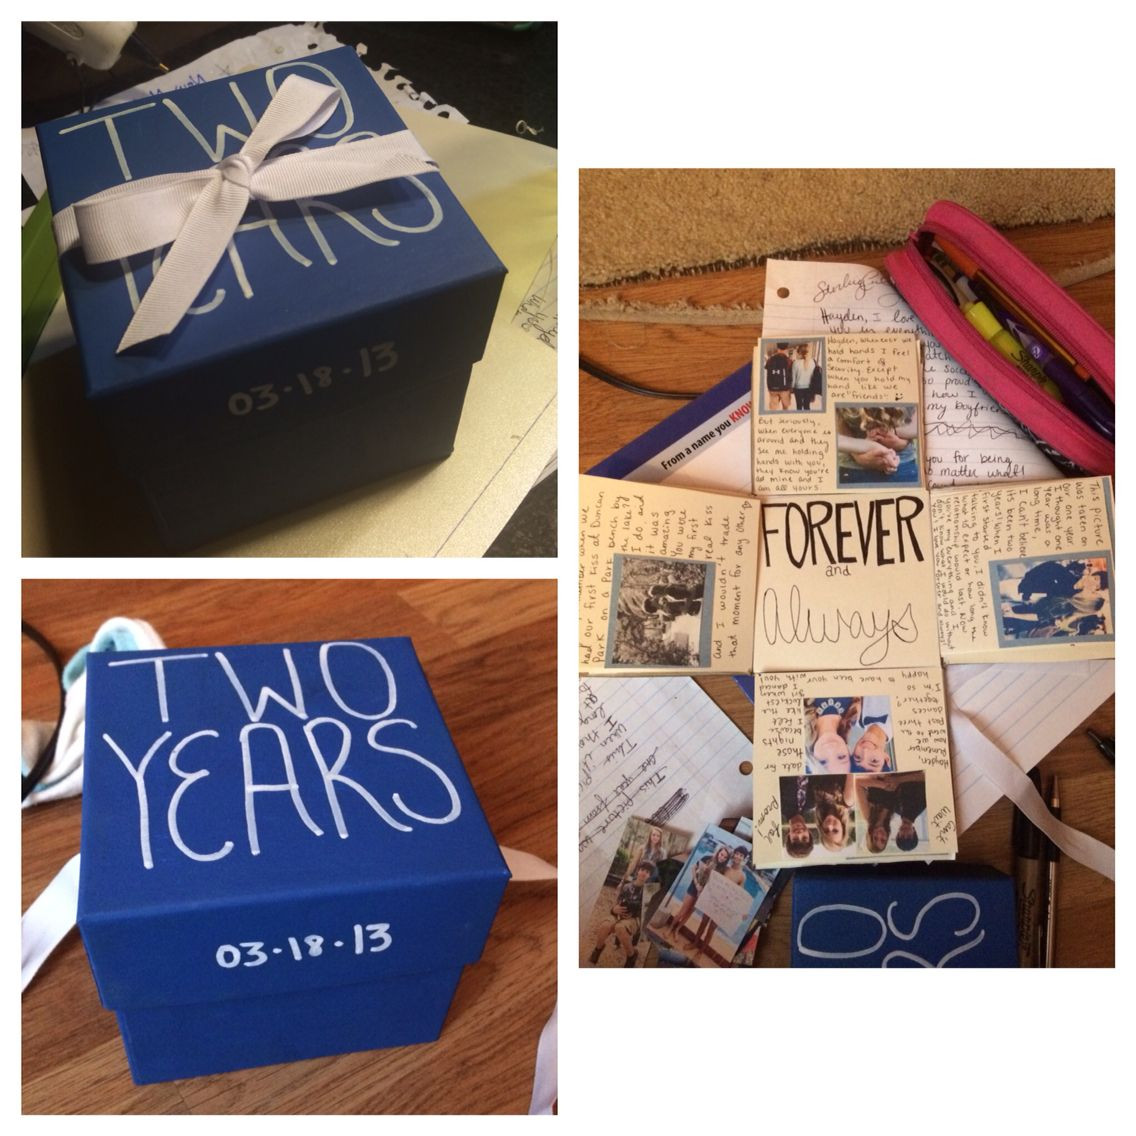 Two Years Anniversary Gift Ideas
 Anniversary box For my boyfriend and I s 2 year I made